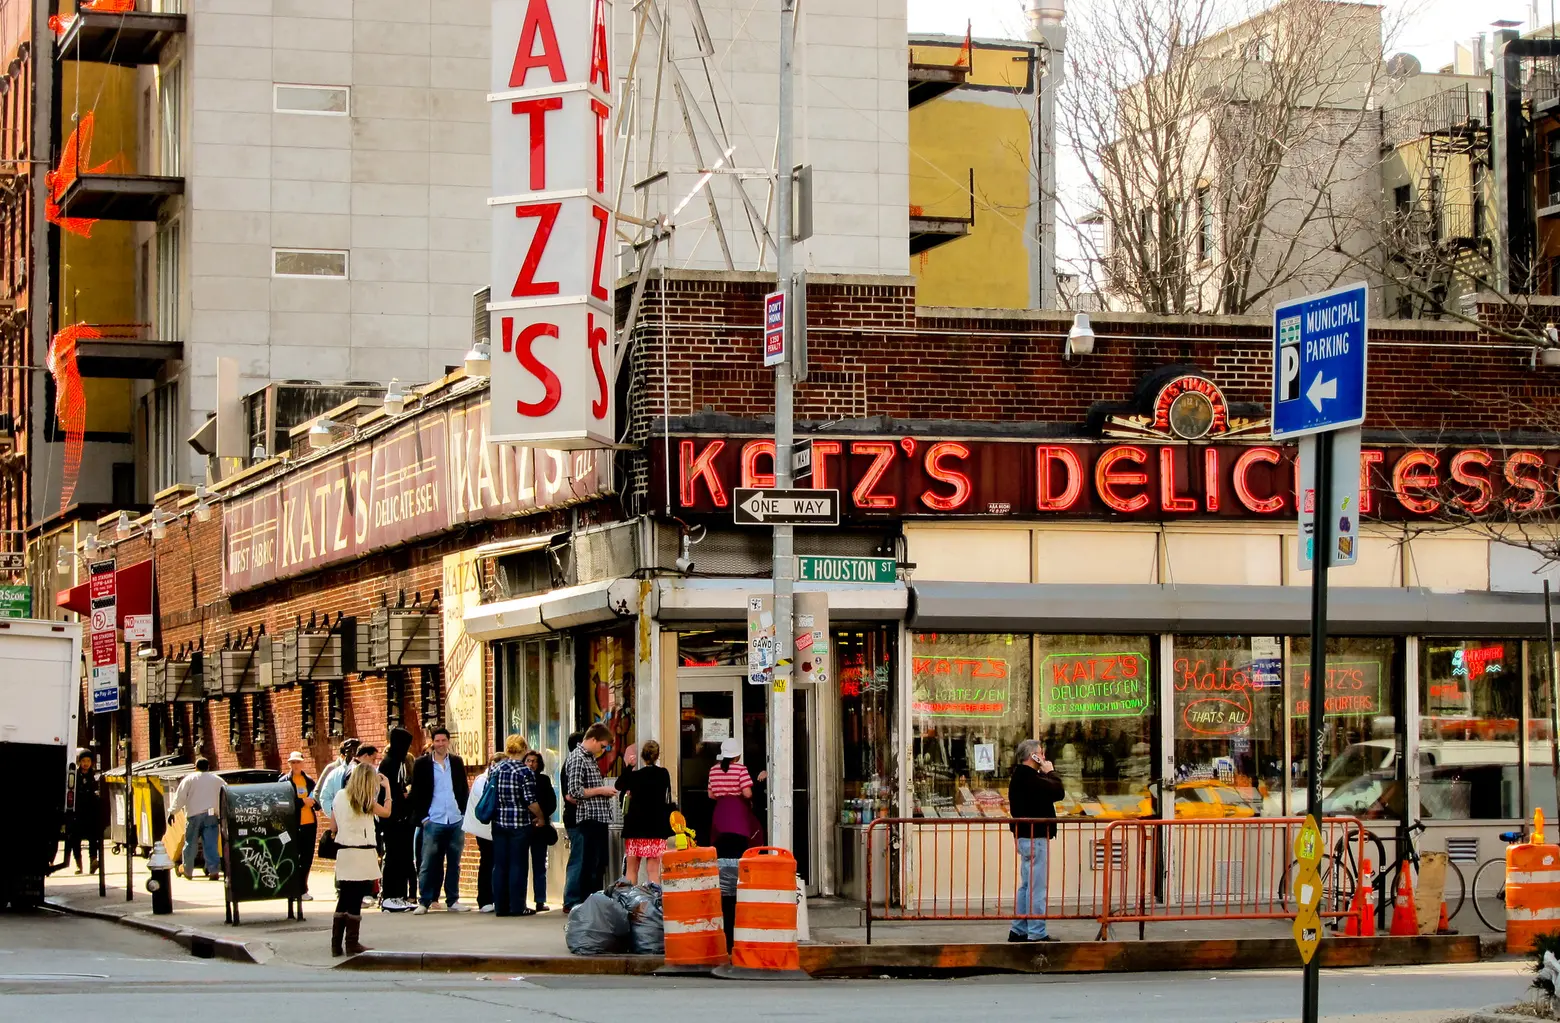 For $2,500, you can get married at Katz’s Deli (pastrami platter included)